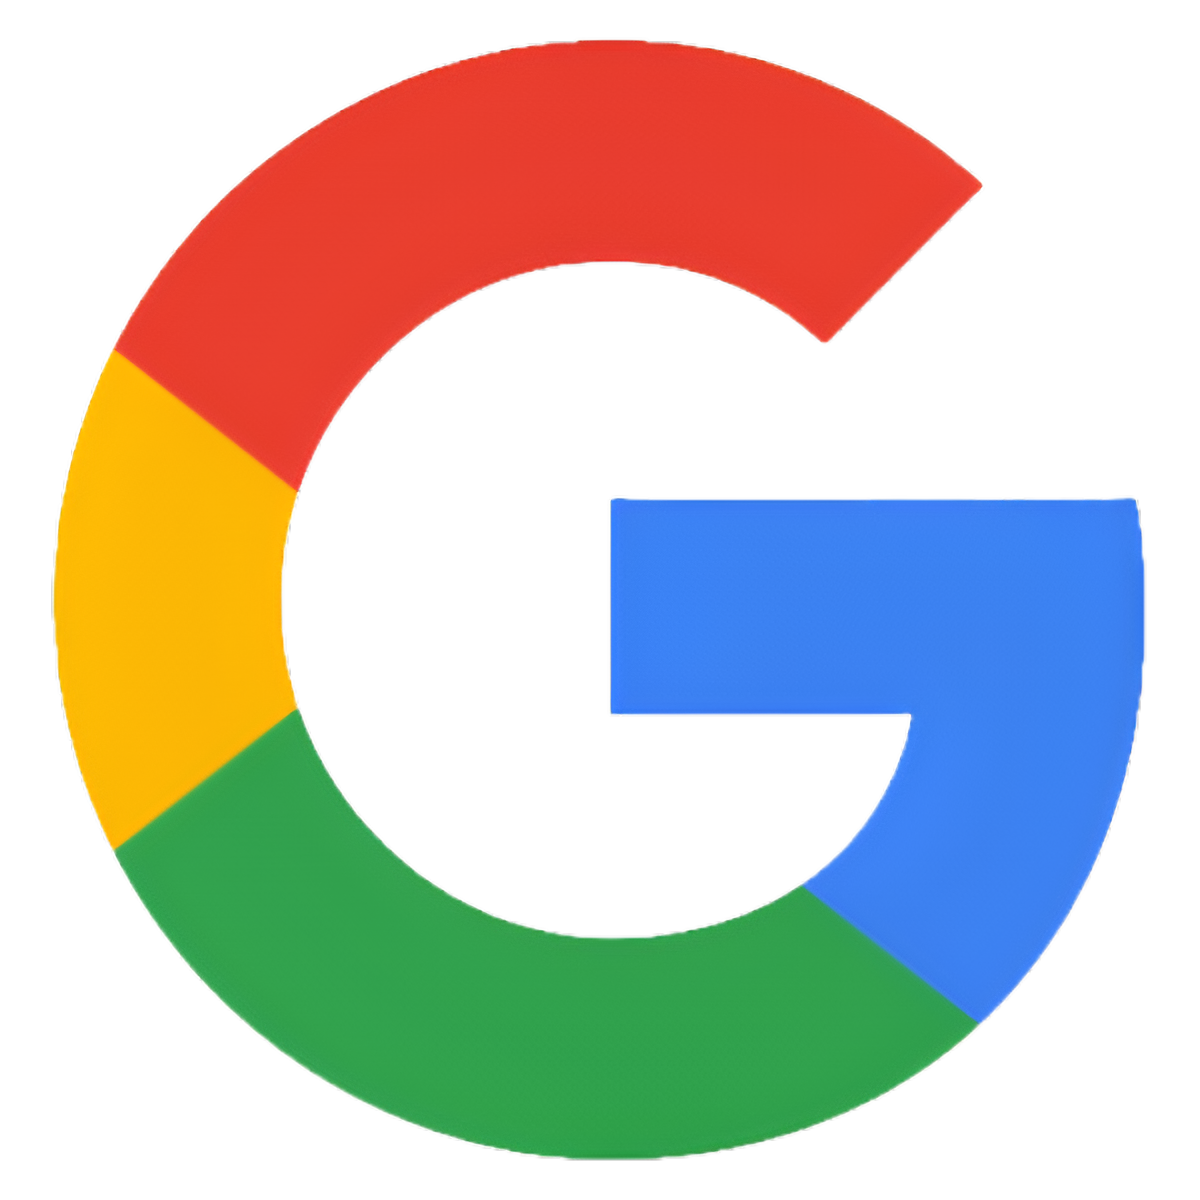 Google Logo Consisting Of A Capital "g" In Four Colors: Red At The Top, Yellow On The Middle Left, Green At The Bottom, And Blue On The Middle Right.